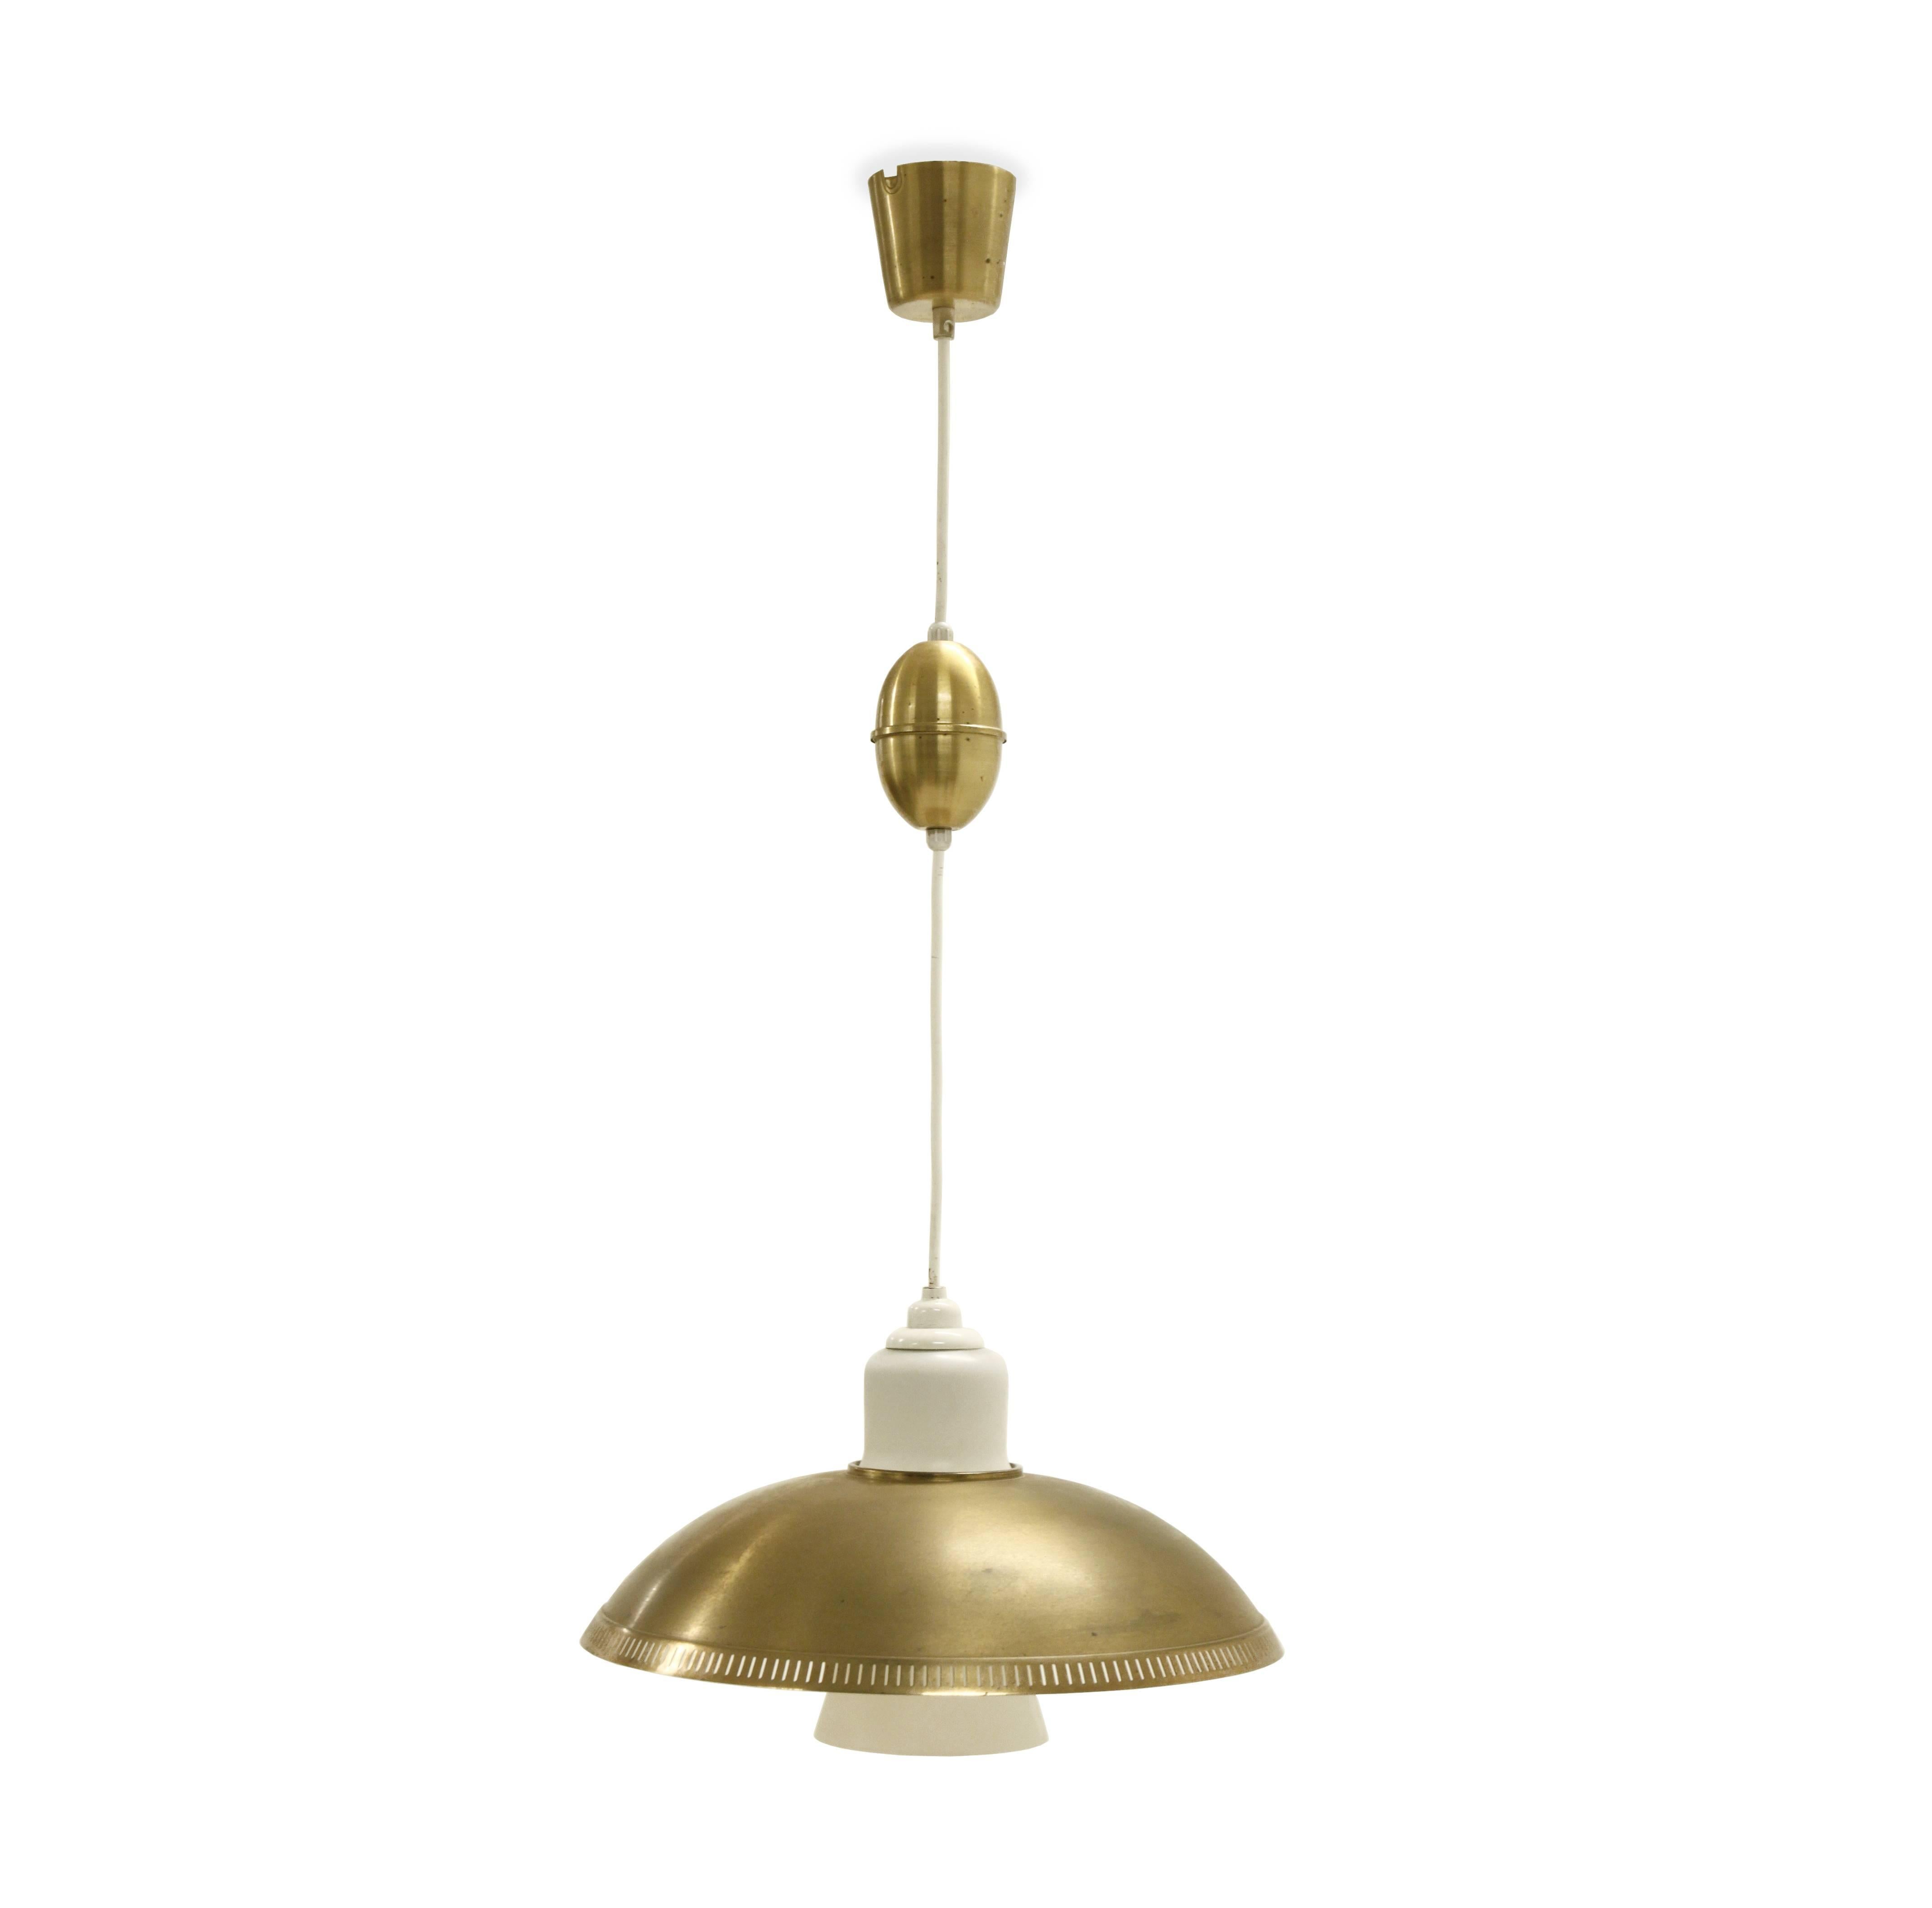 Wonderful and modernist ceiling light in brass and opaline glass.

Designed by Bengt Karlby and made in Denmark by Lyfa from circa 1960s first half.

The lamp is fully working and in good vintage condition.

Fixture height: 30.